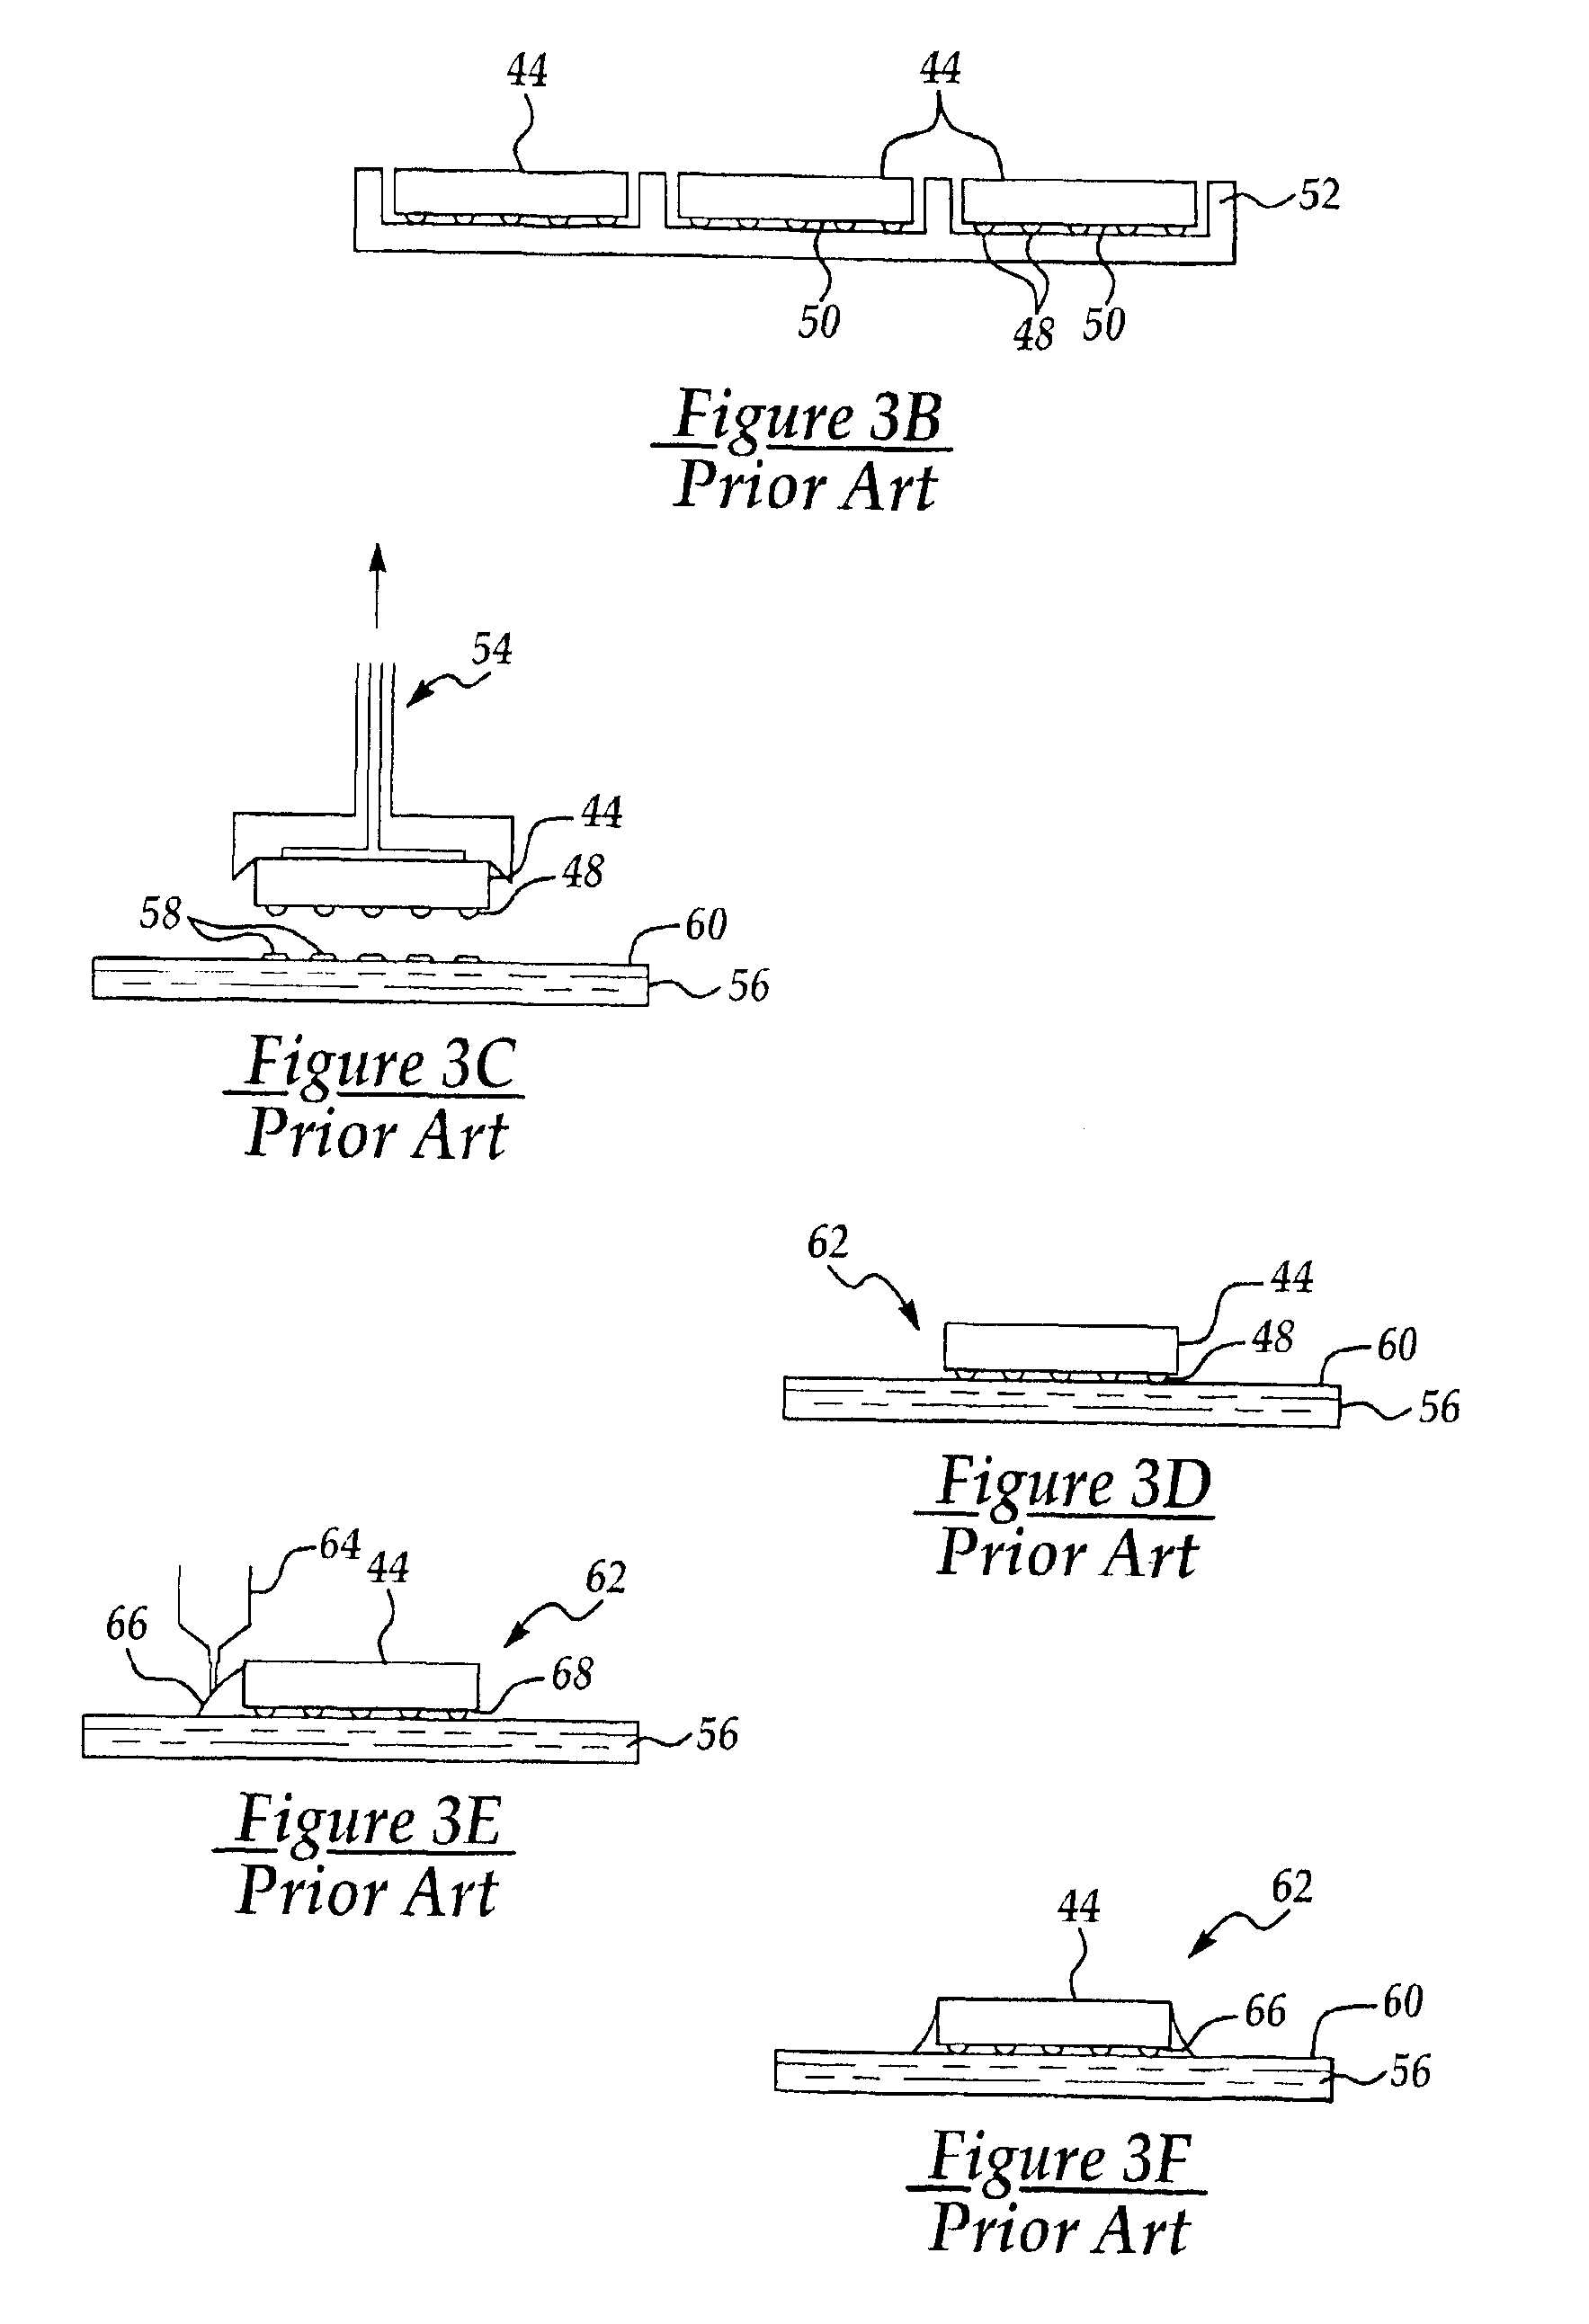 Method for bonding IC chips to substrates incorporating dummy bumps and non-conductive adhesive and structures formed